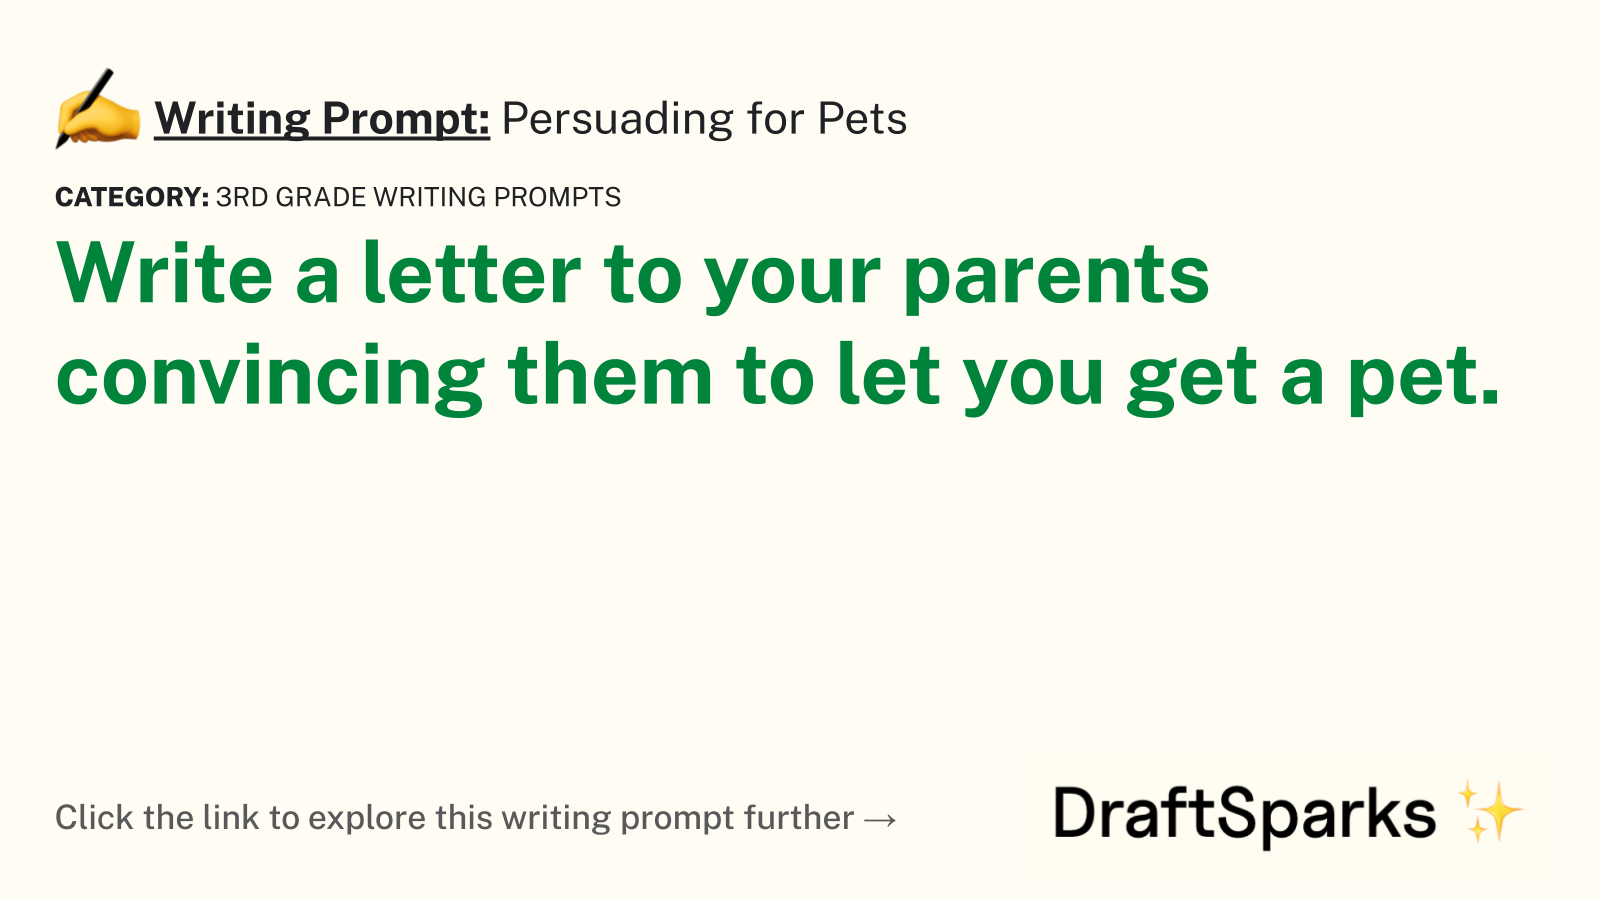 Persuading for Pets